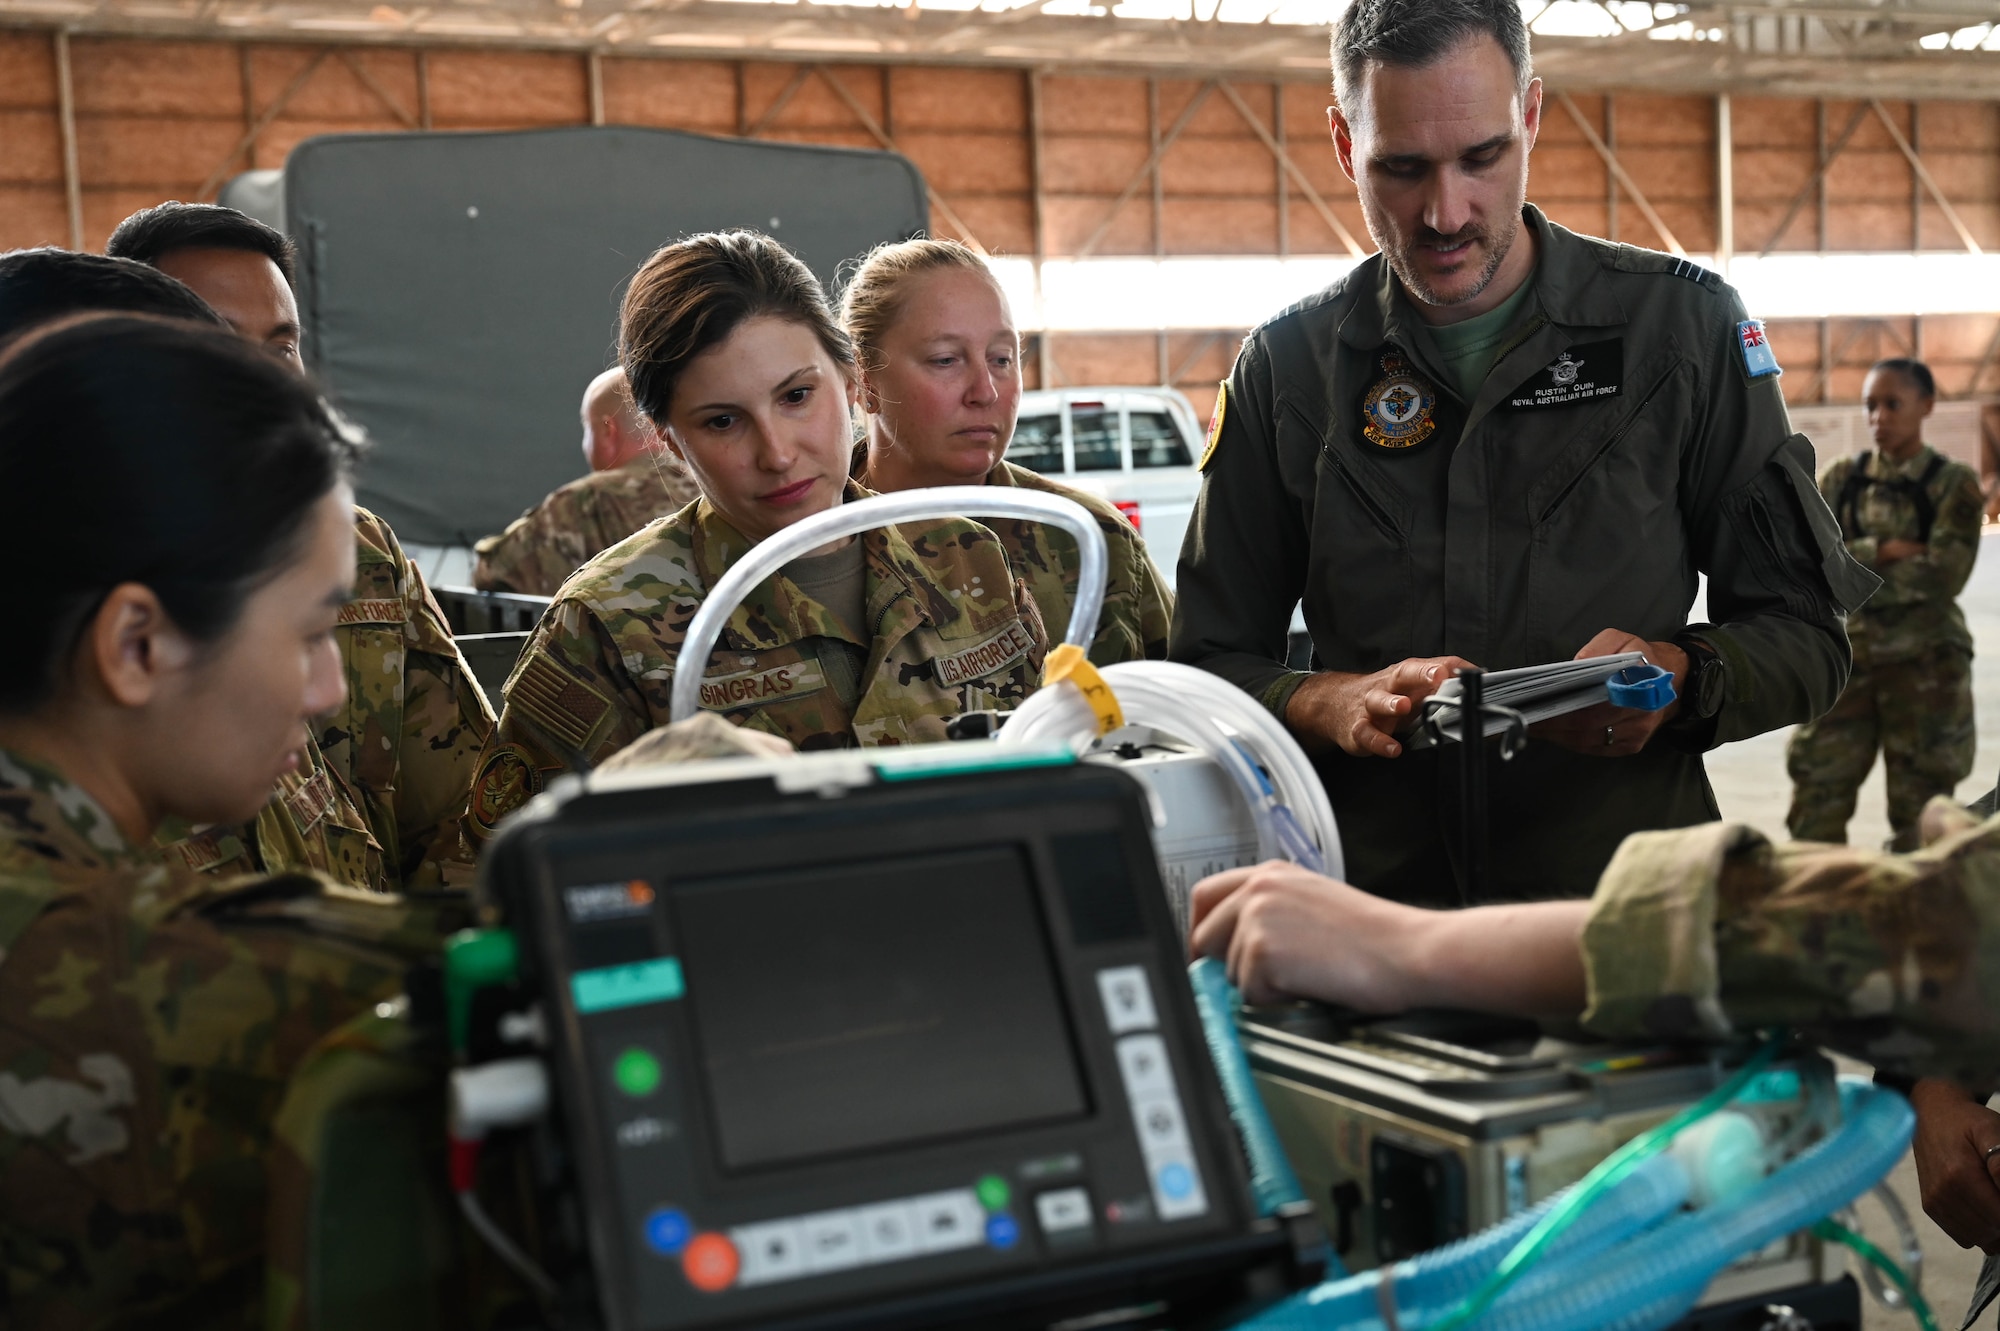 Royal Australian Air Force and U.S. Air Force medics participate in medical training exercises for Mobility Guardian 23 at RAAF Base Darwin, Australia, July 9, 2023. The Mobility Air Forces role in providing the meaningful maneuver of forces throughout the theater underscores the necessity of logistics and realistic interoperability in the region. (U.S. Air Force photo by Master Sgt. Amy Picard)